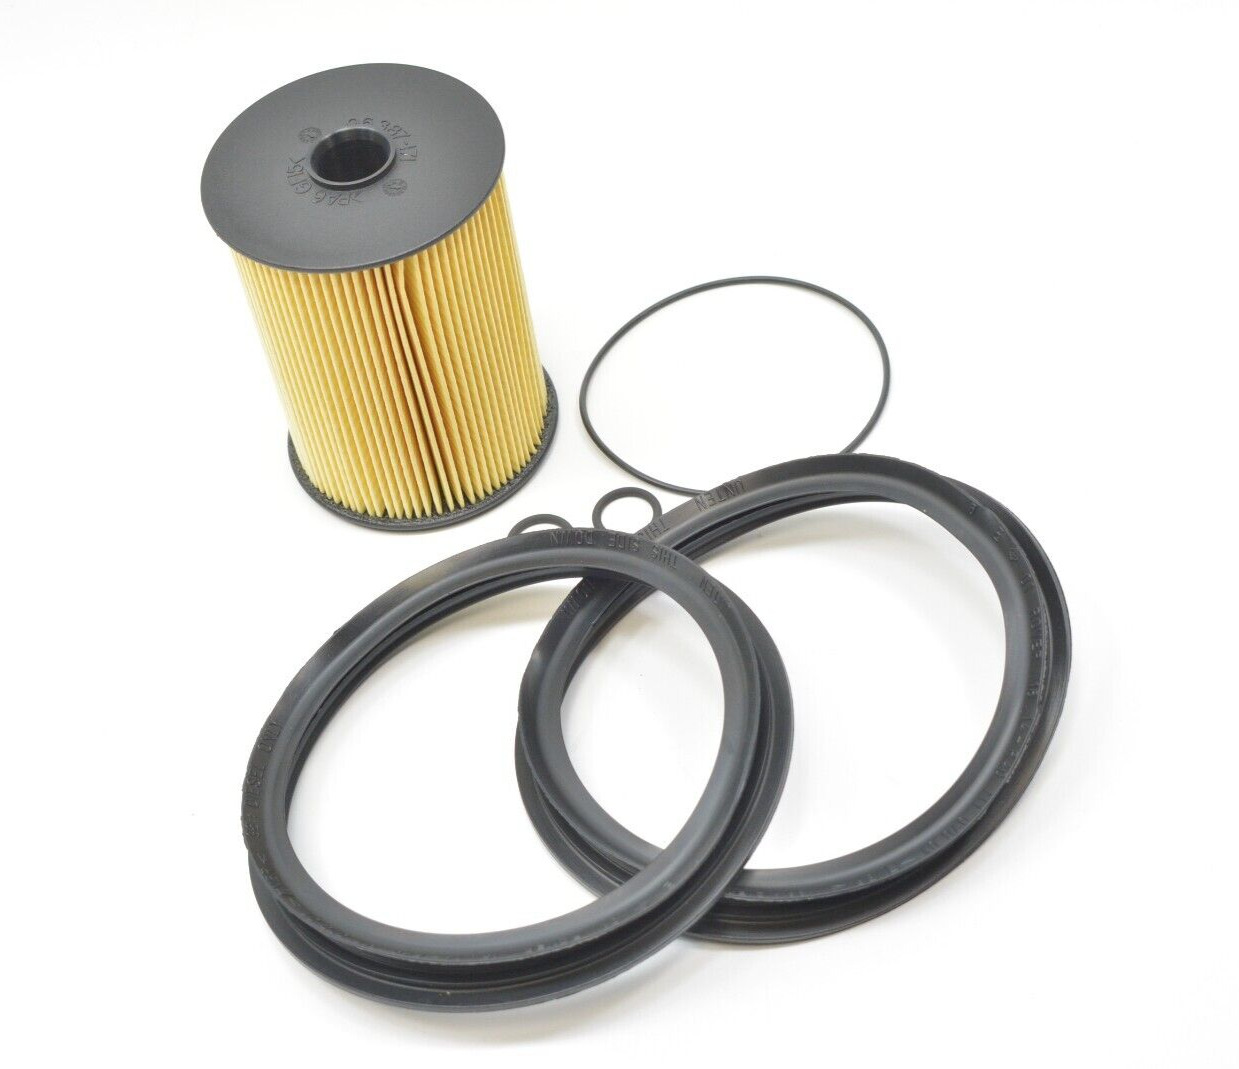 Genuine Mini Cooper 1.6 L4 R50 R52 R53 Fuel Filter Kit With Gaskets 16146757196